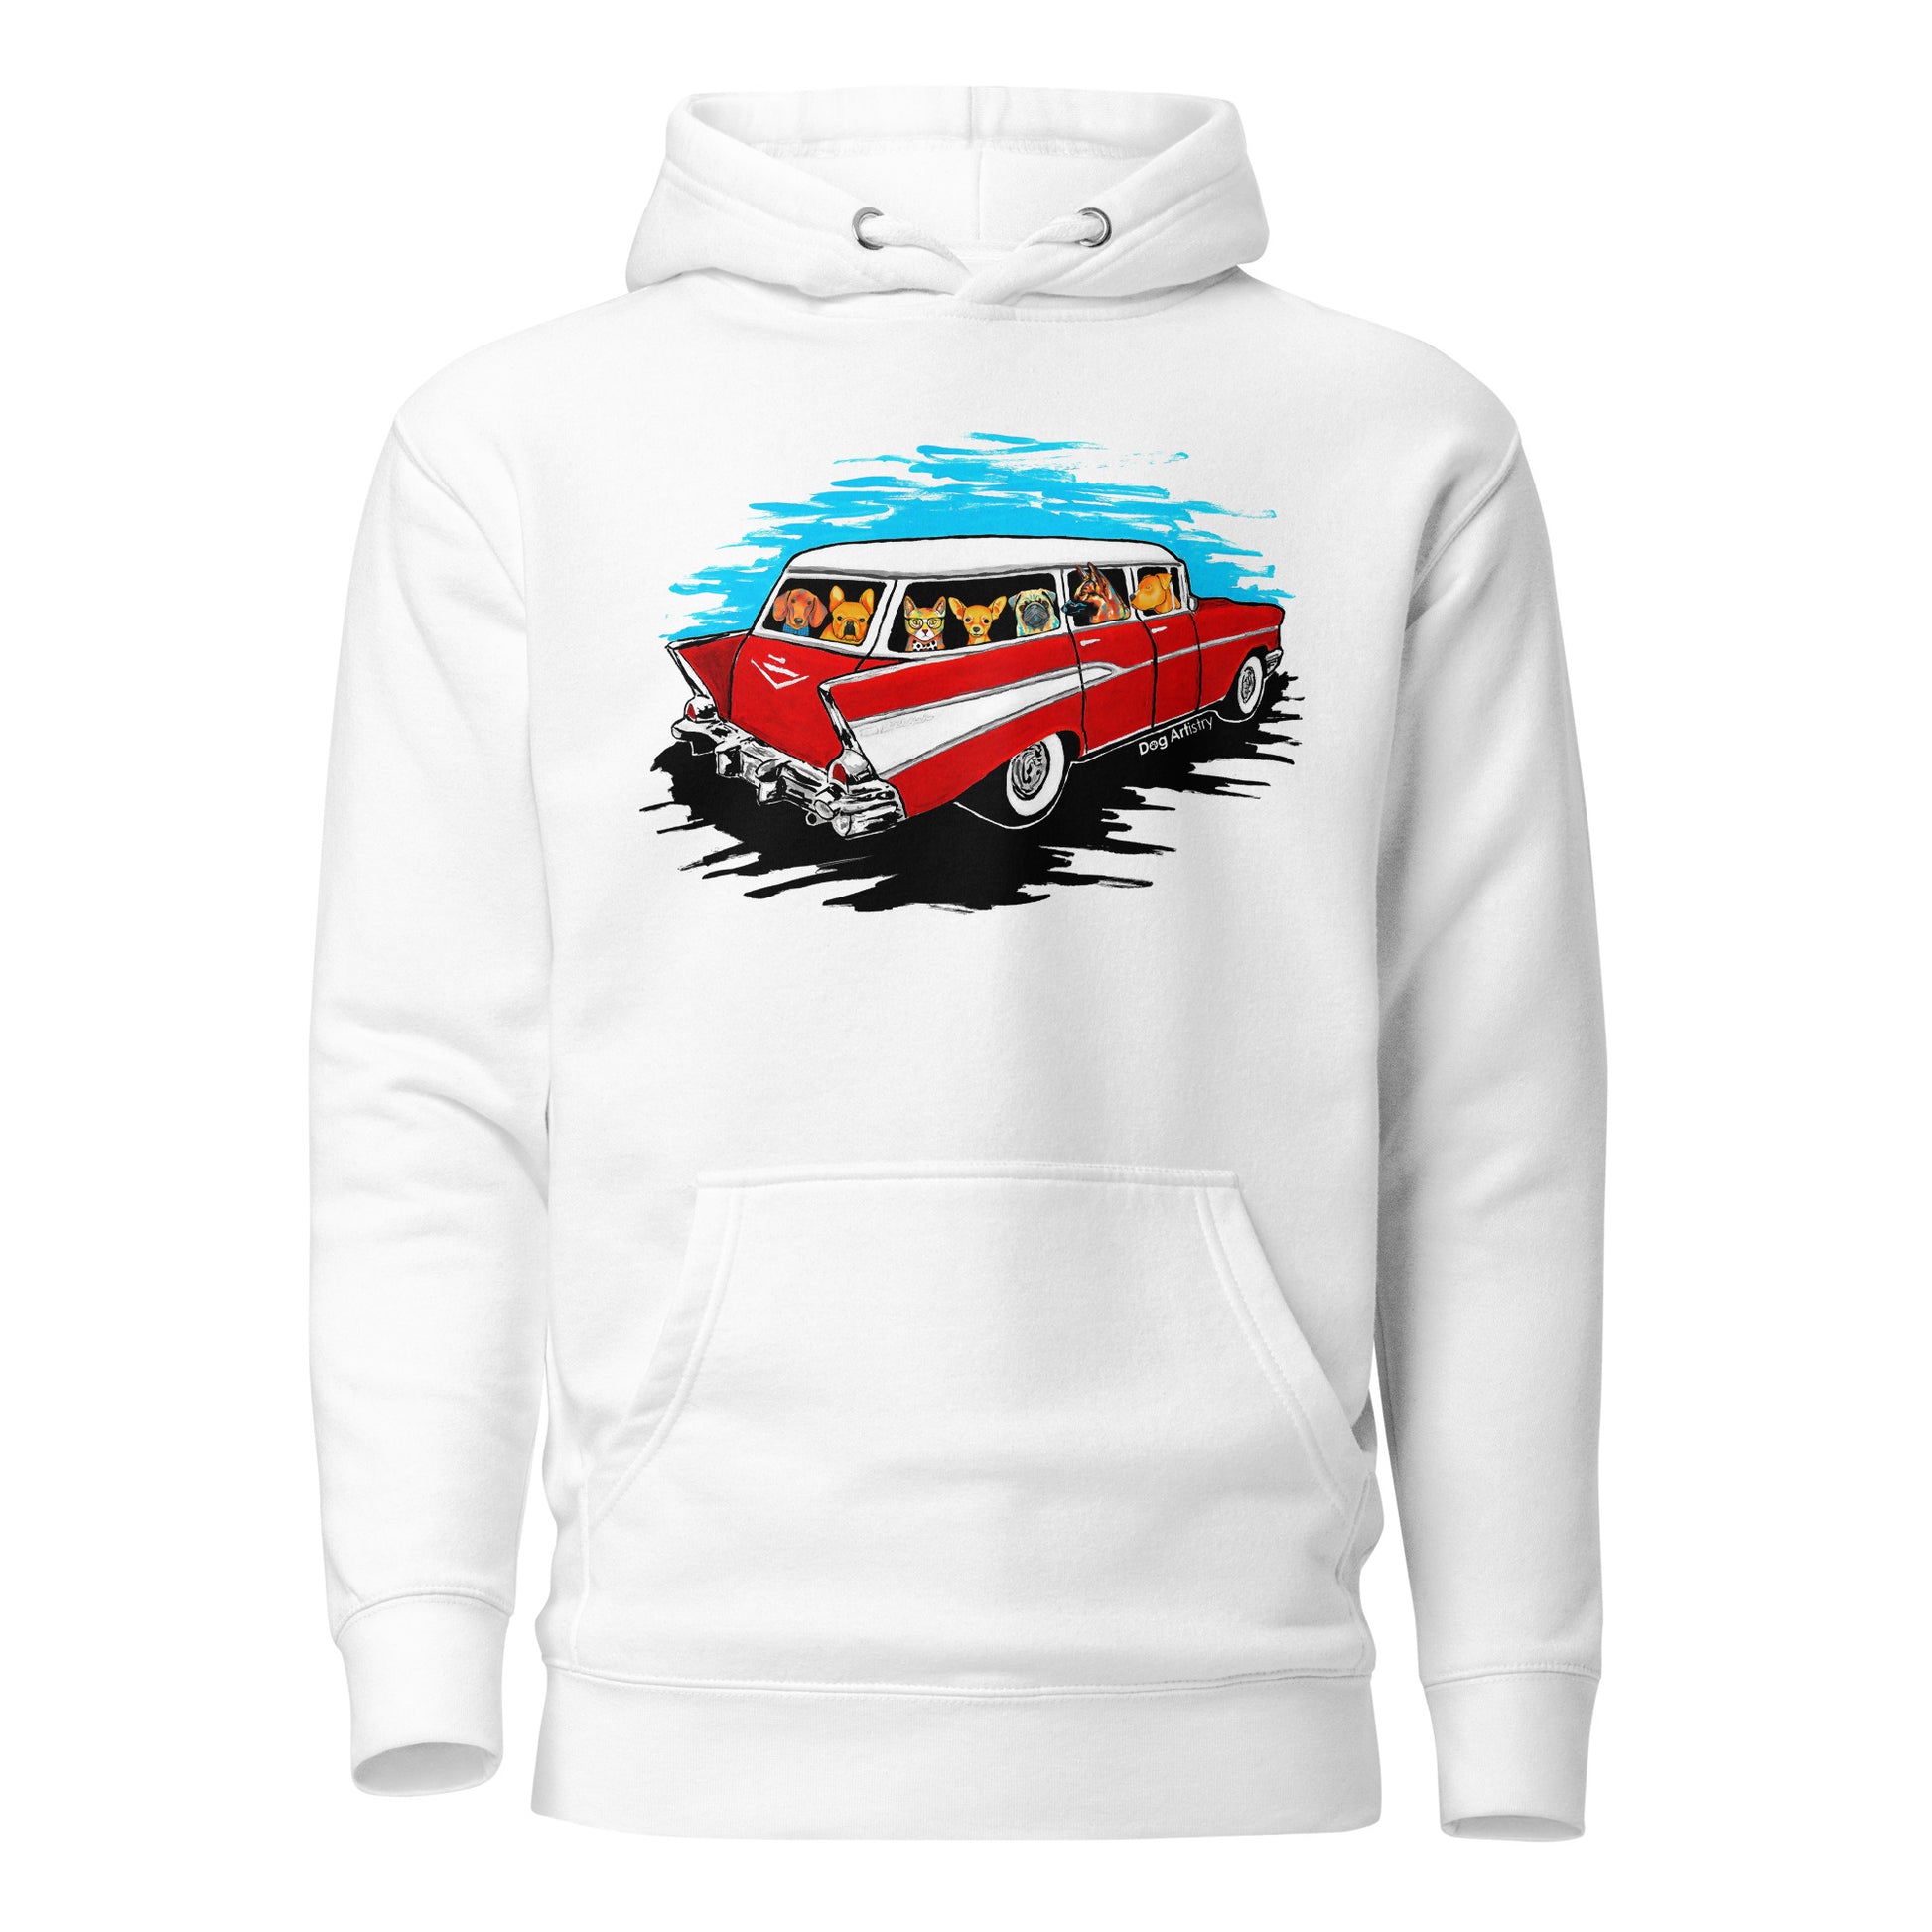 Dog Artistry Unisex Hoodie of a 57 Chevy Wagon full of dogs, Dachshund, French Bulldog, Cat, Chihuahua, Pug, German Shepherd, and Pit Bull.